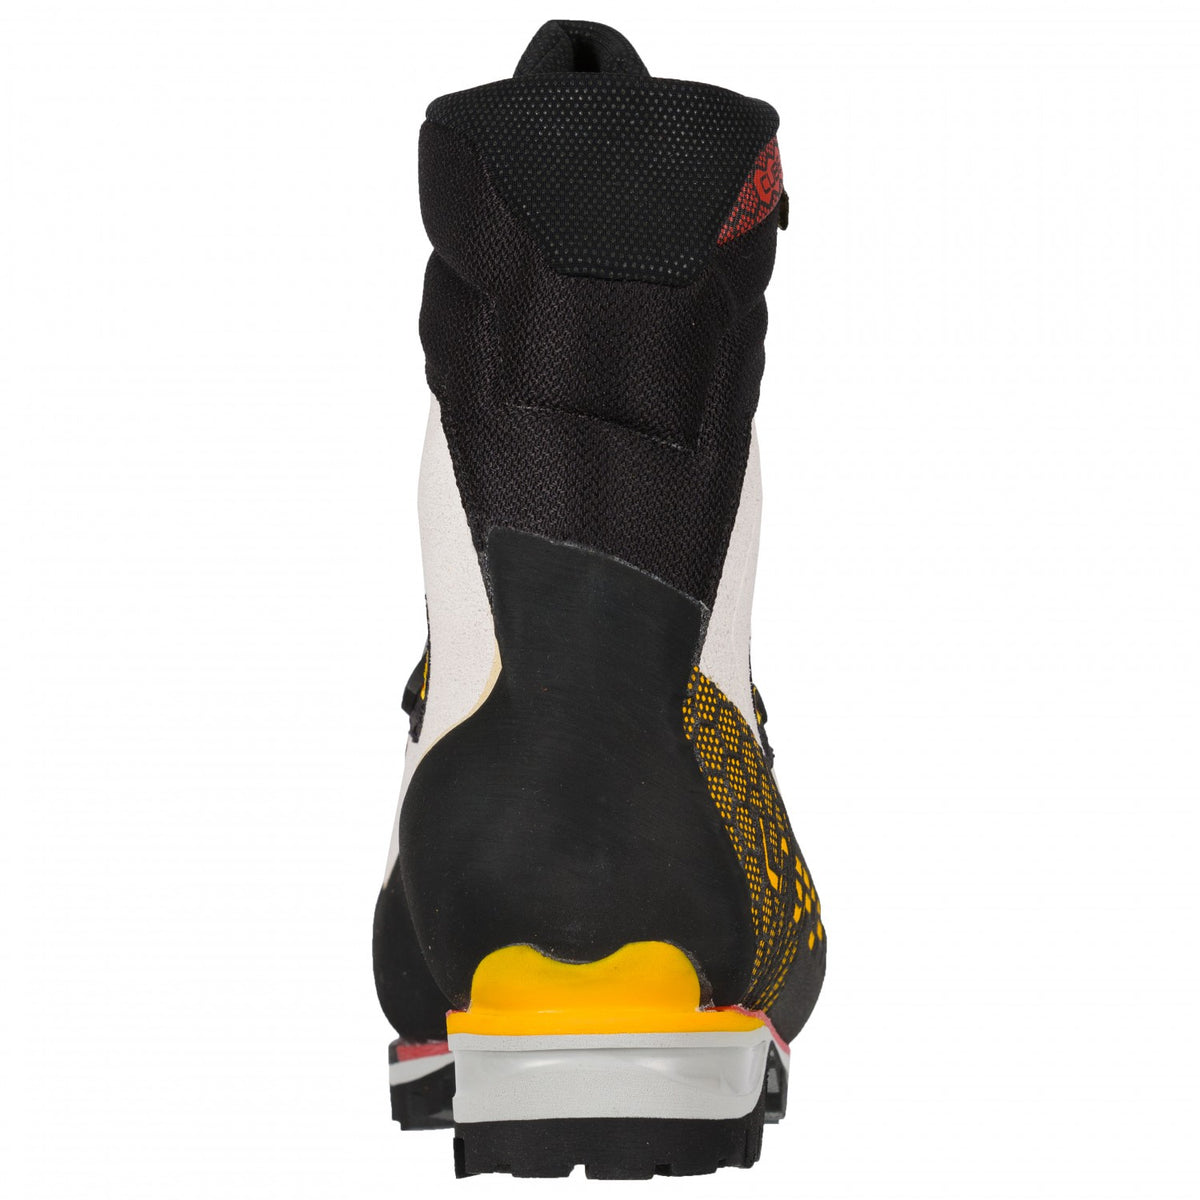 Rear view of the La Sportiva Nepal Cube GTX Womens in black, yellow and ice grey